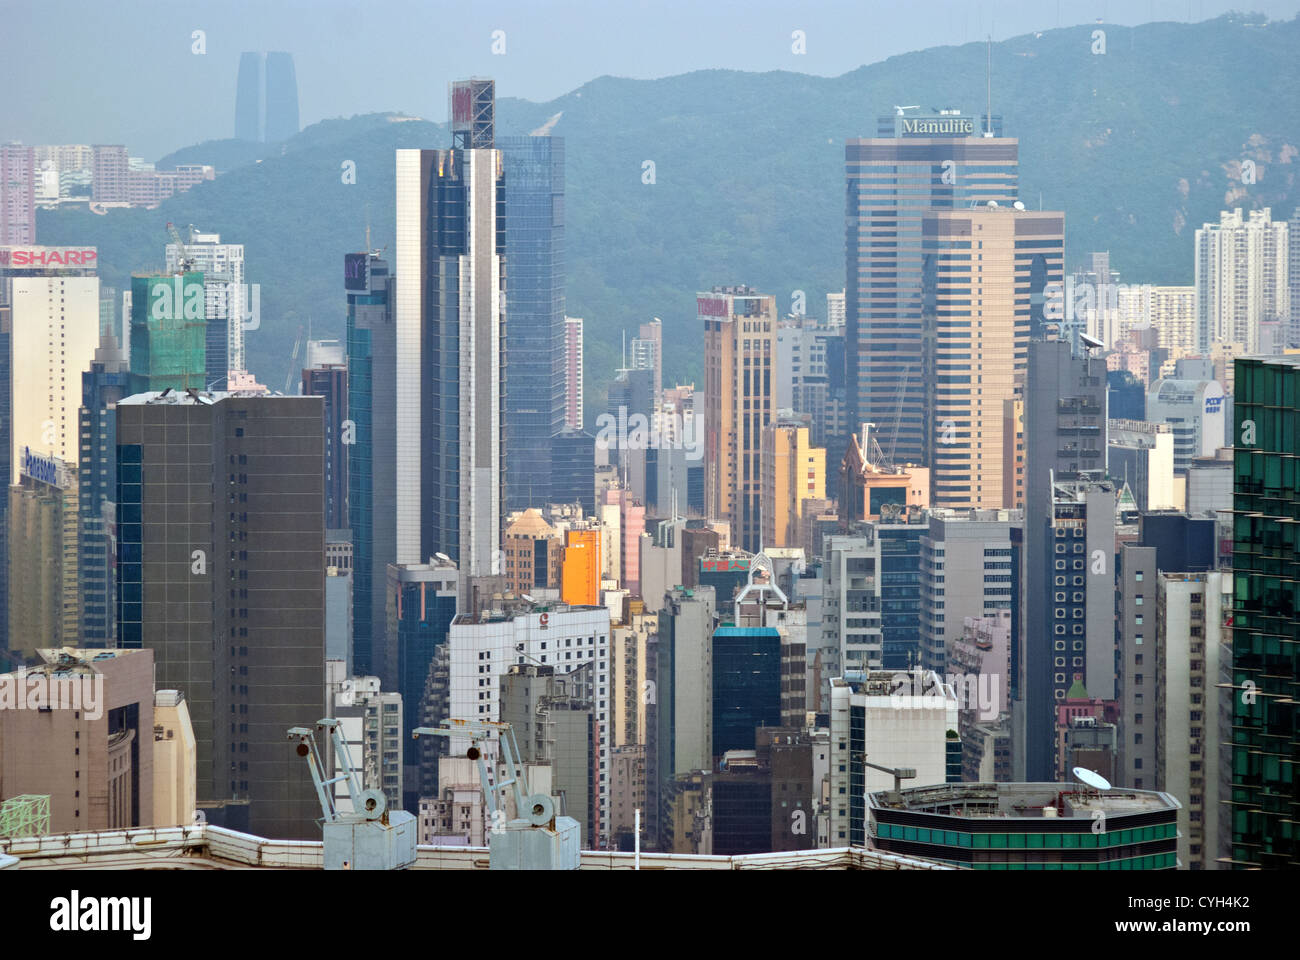 Overview of Hong Kong showing high-rise accommodation and business development Stock Photo